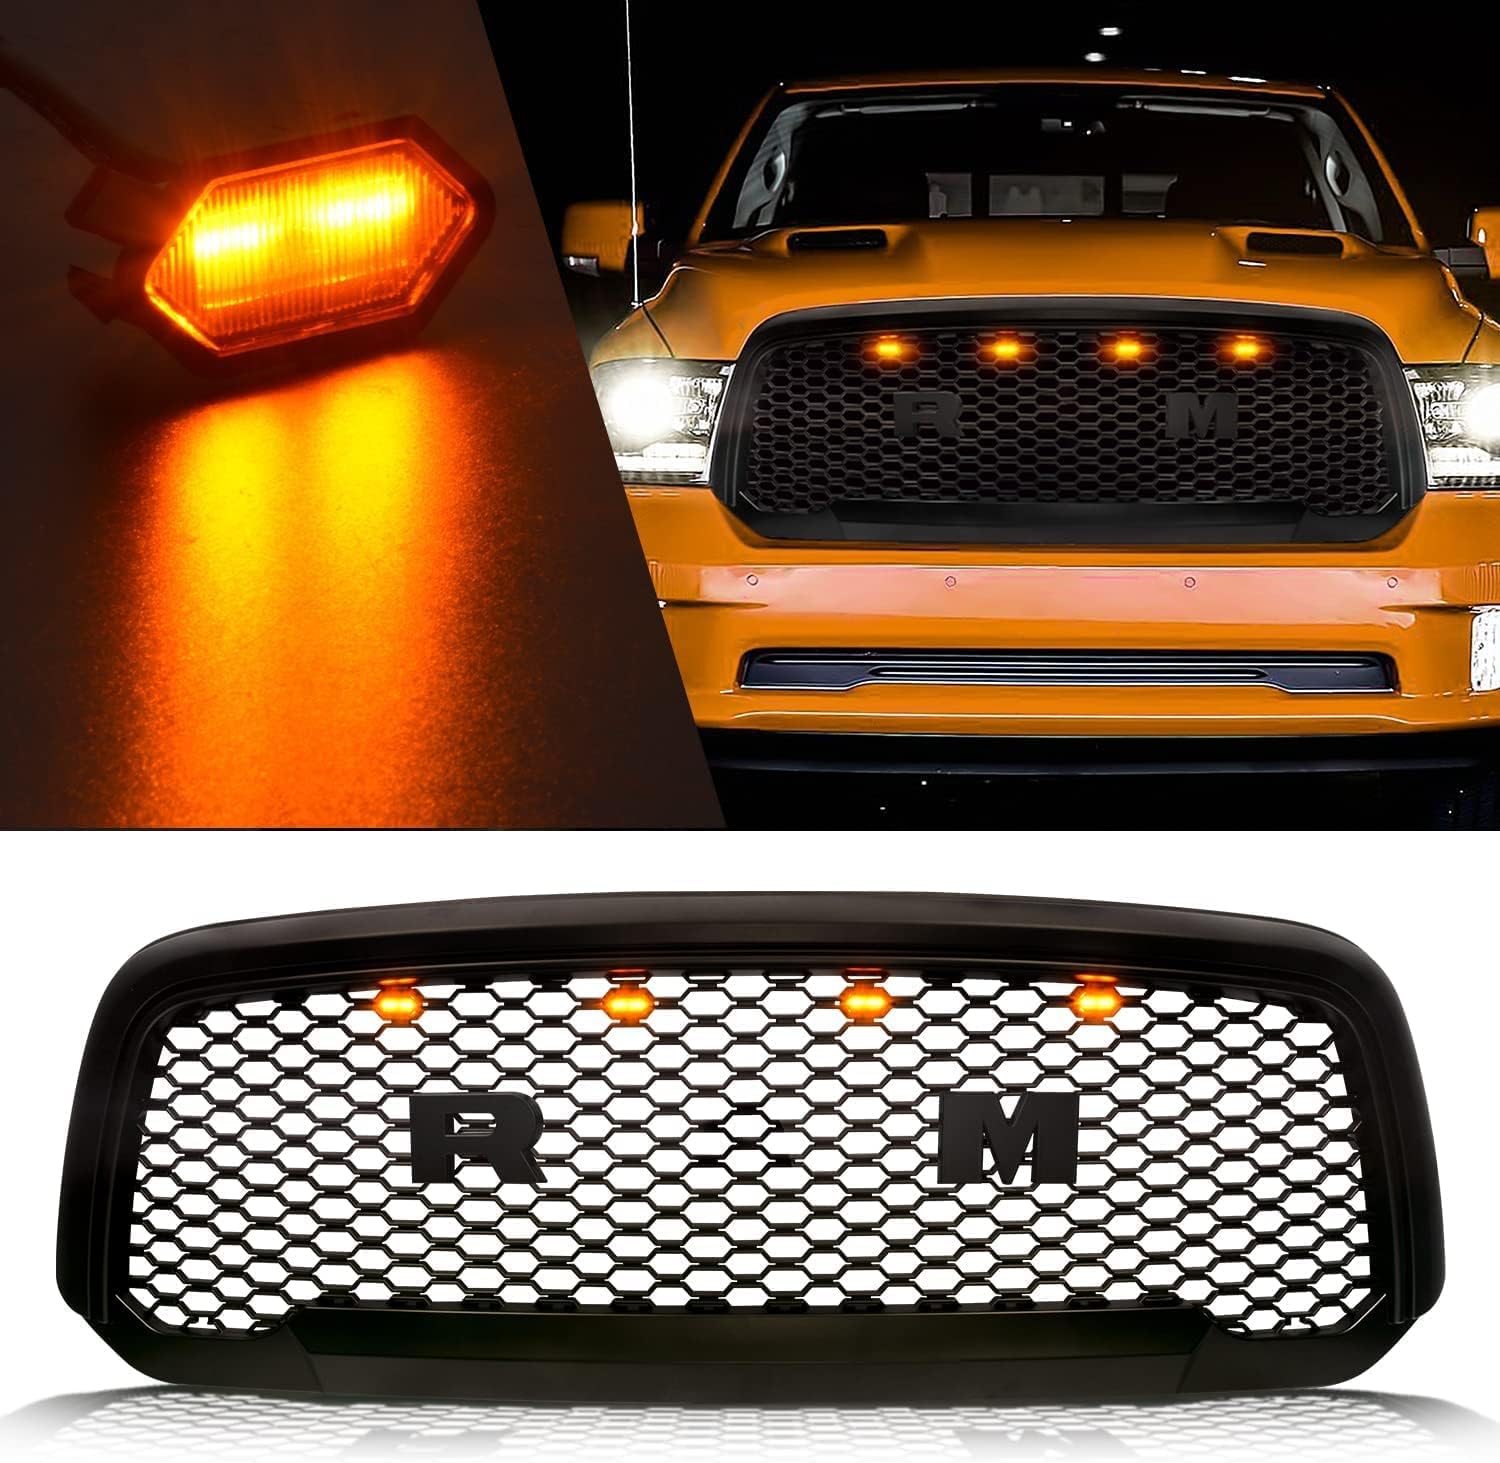 Helen Autoparts Grill Amber Light Fit for Dodge Ram Grille 2013 2014 2015 2016 2017 2018 4Pcs LED Lights (Yellow surface amber light)